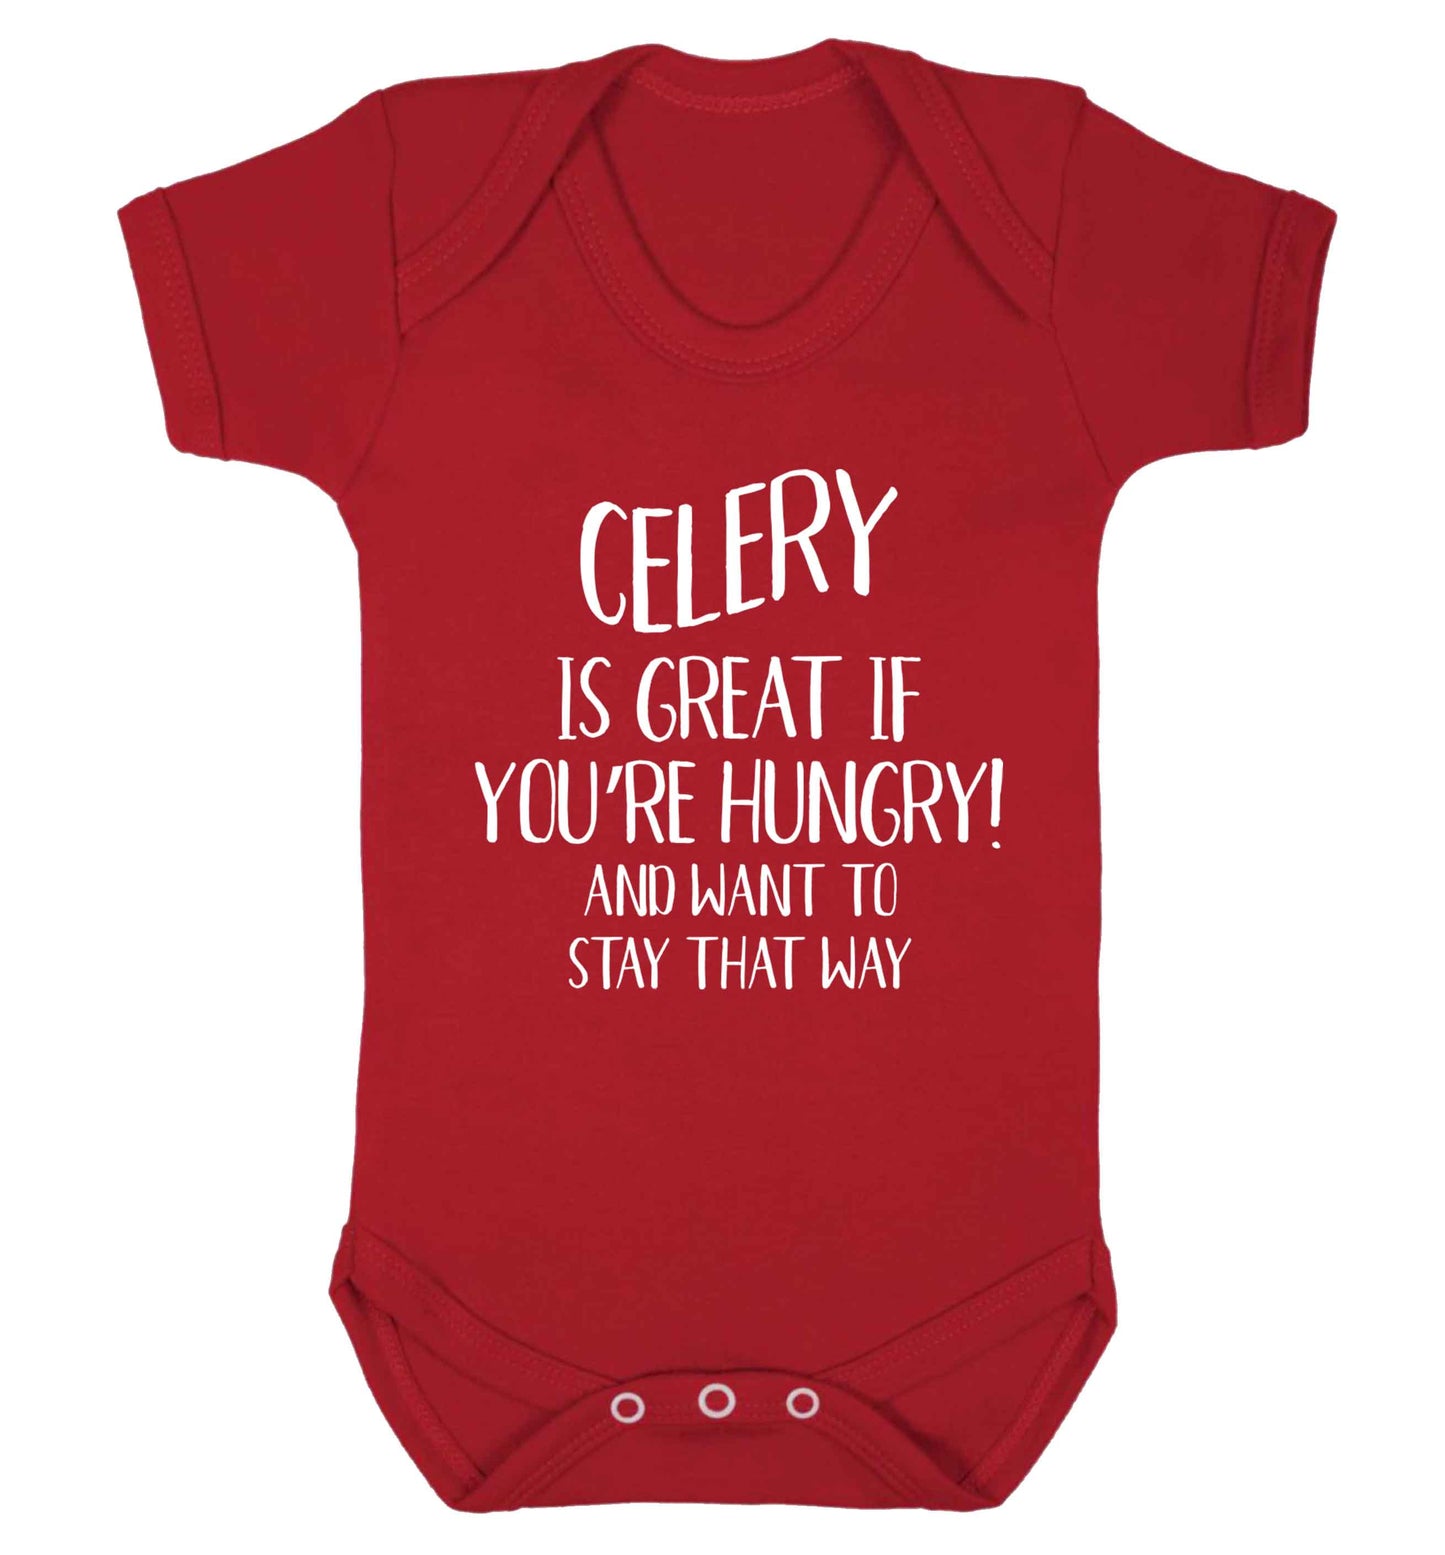 Cellery is great when you're hungry and want to stay that way Baby Vest red 18-24 months